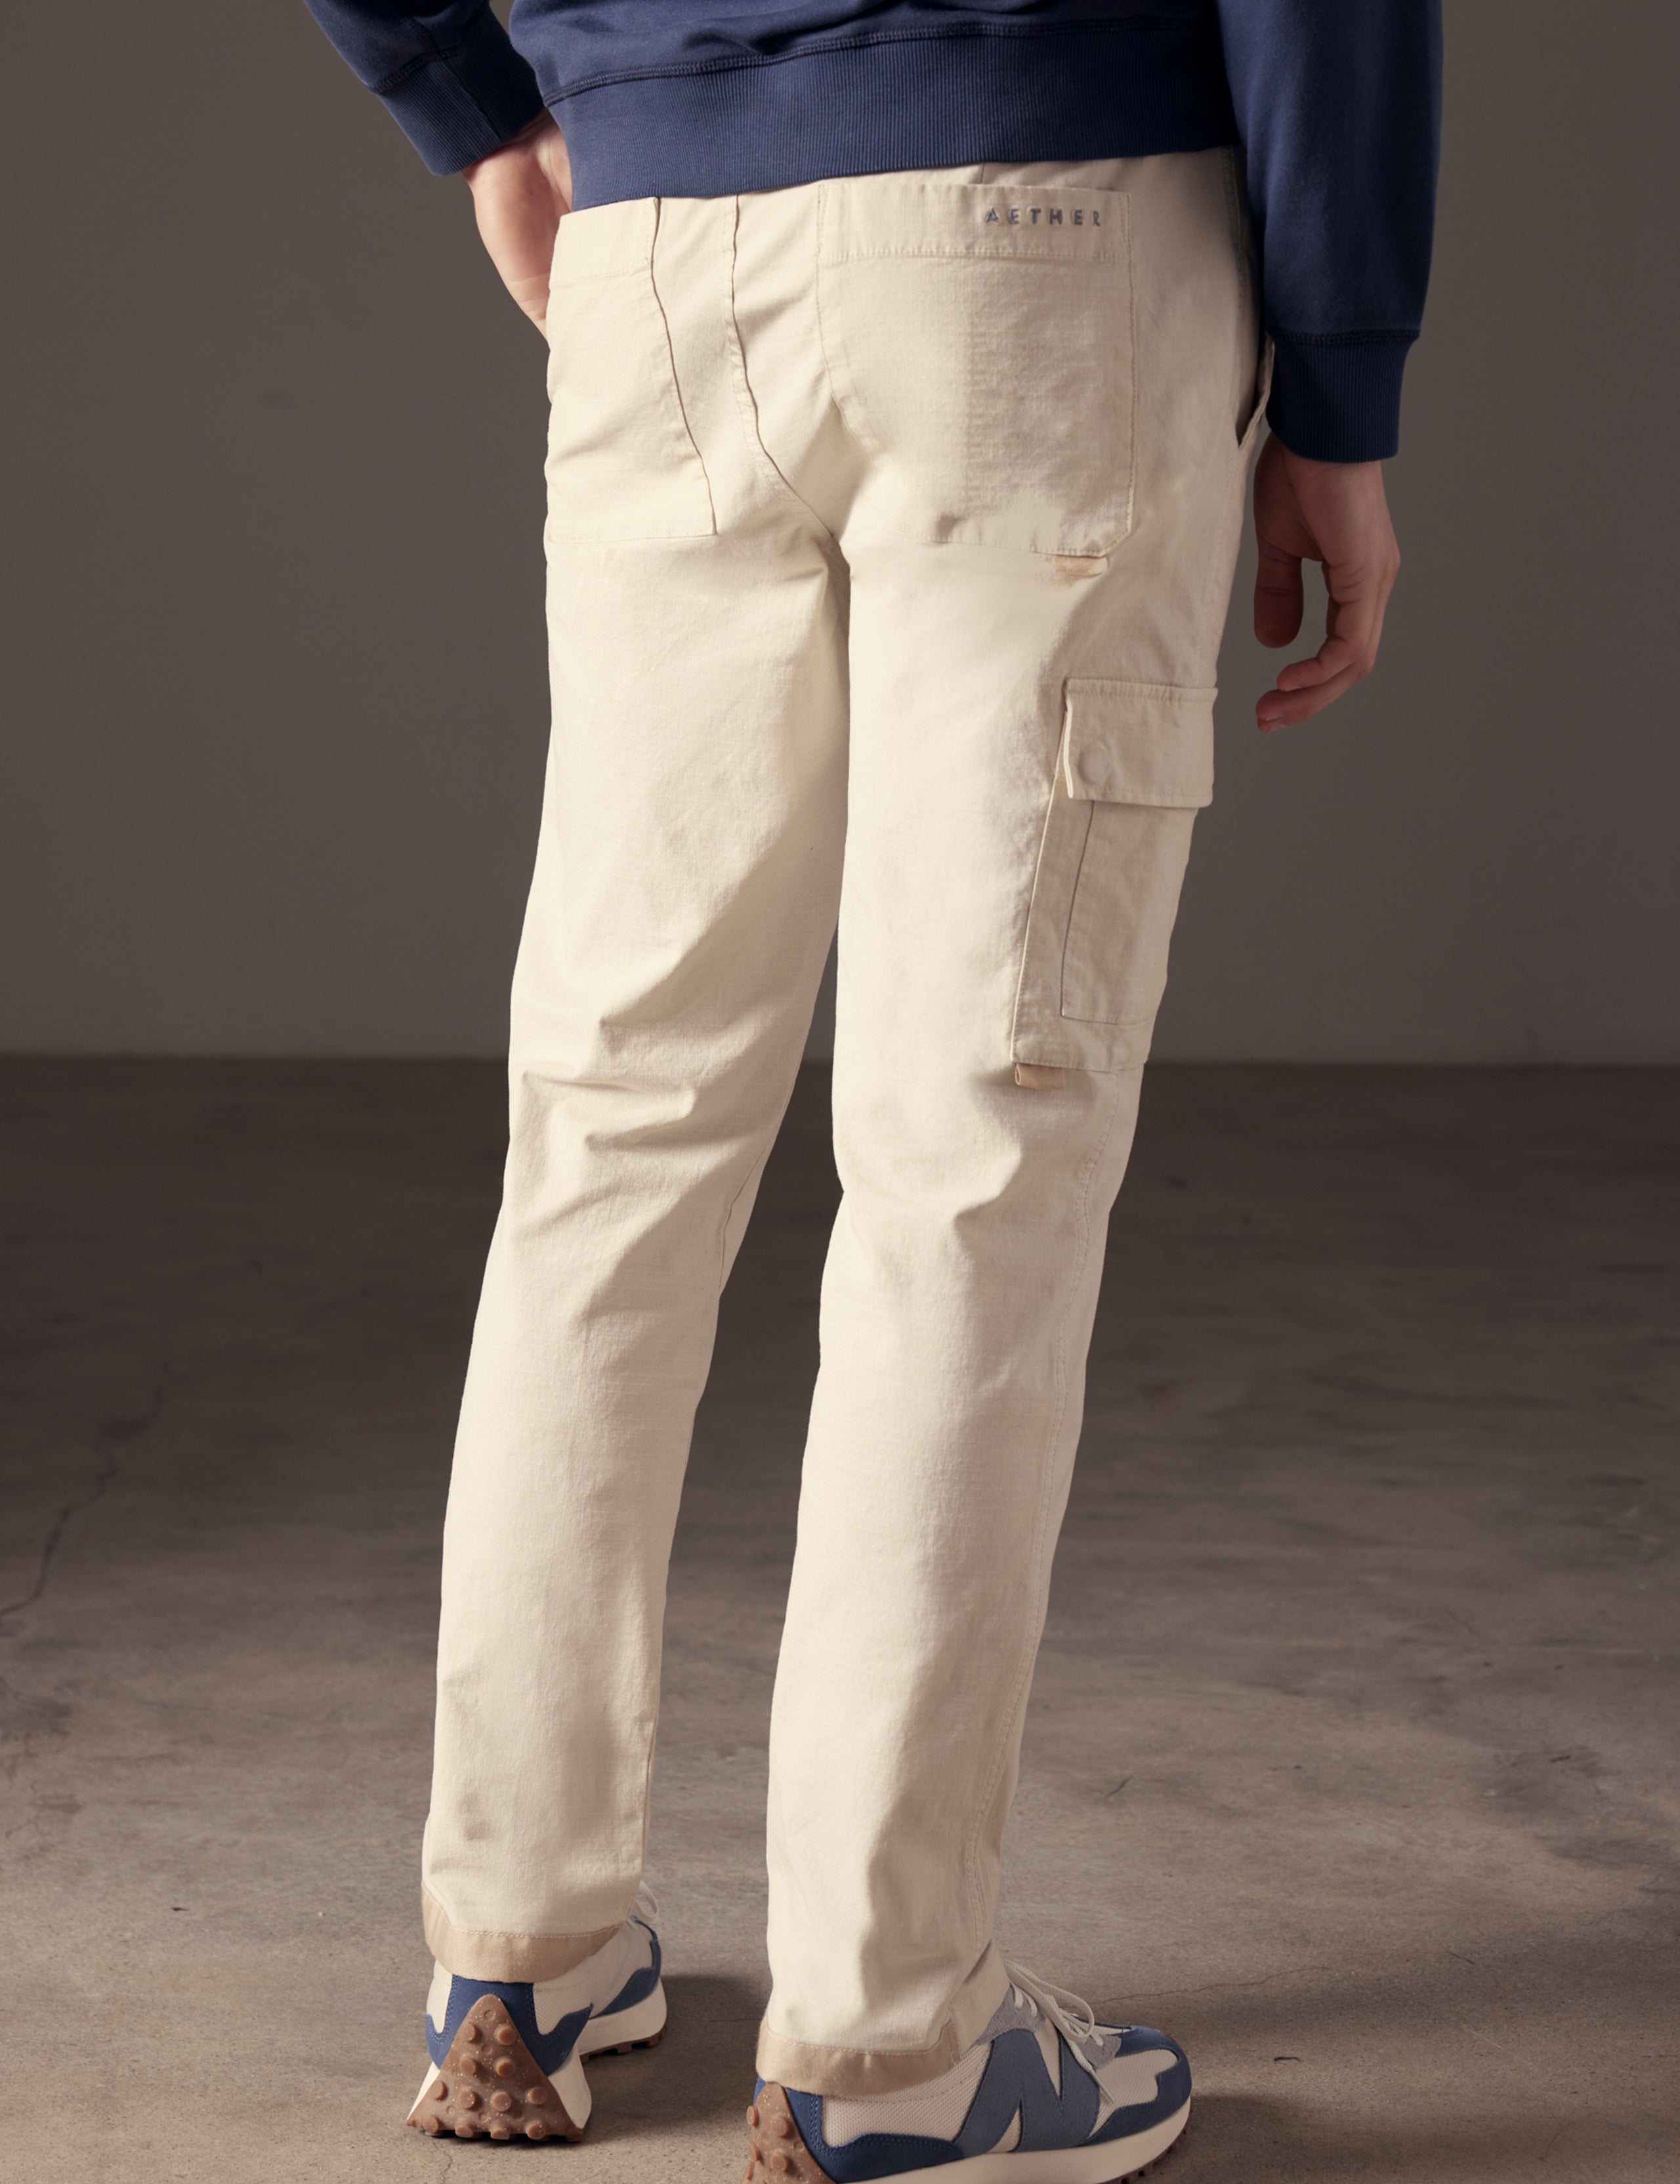 back view of man wearing beige cotton ripstop pants